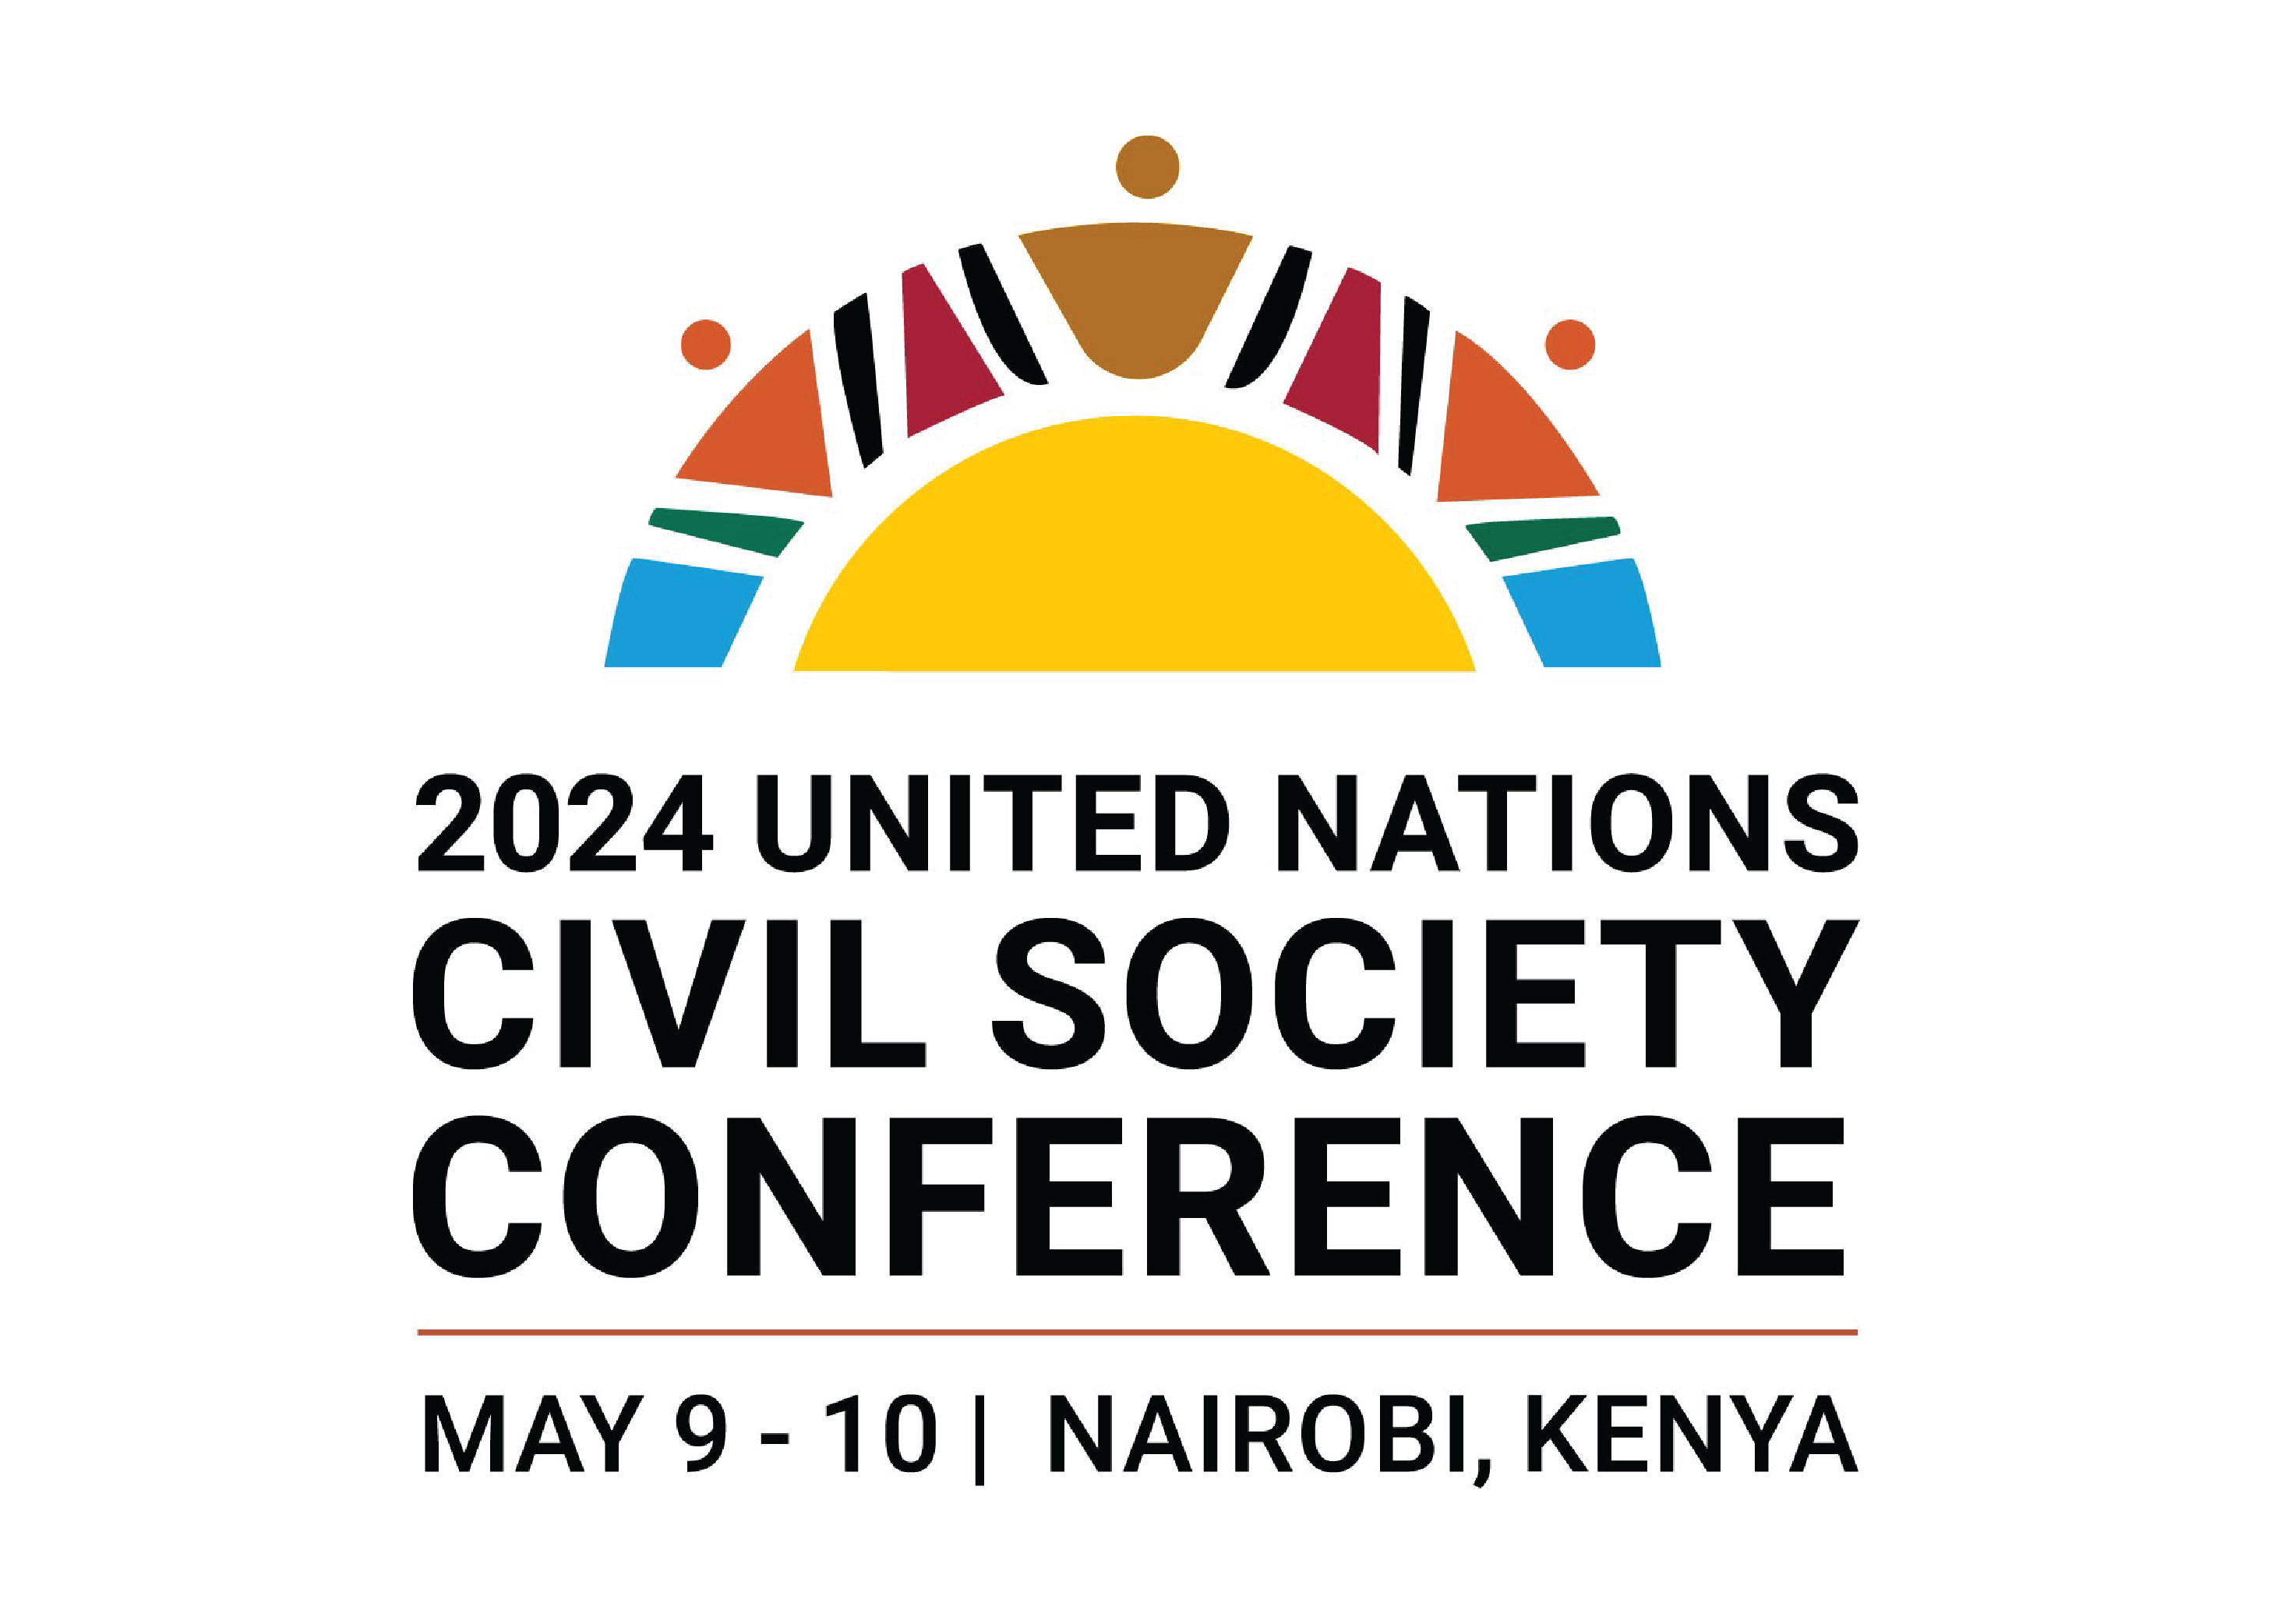 Join us at the 2024 UN Civil Society Conference in Nairobi